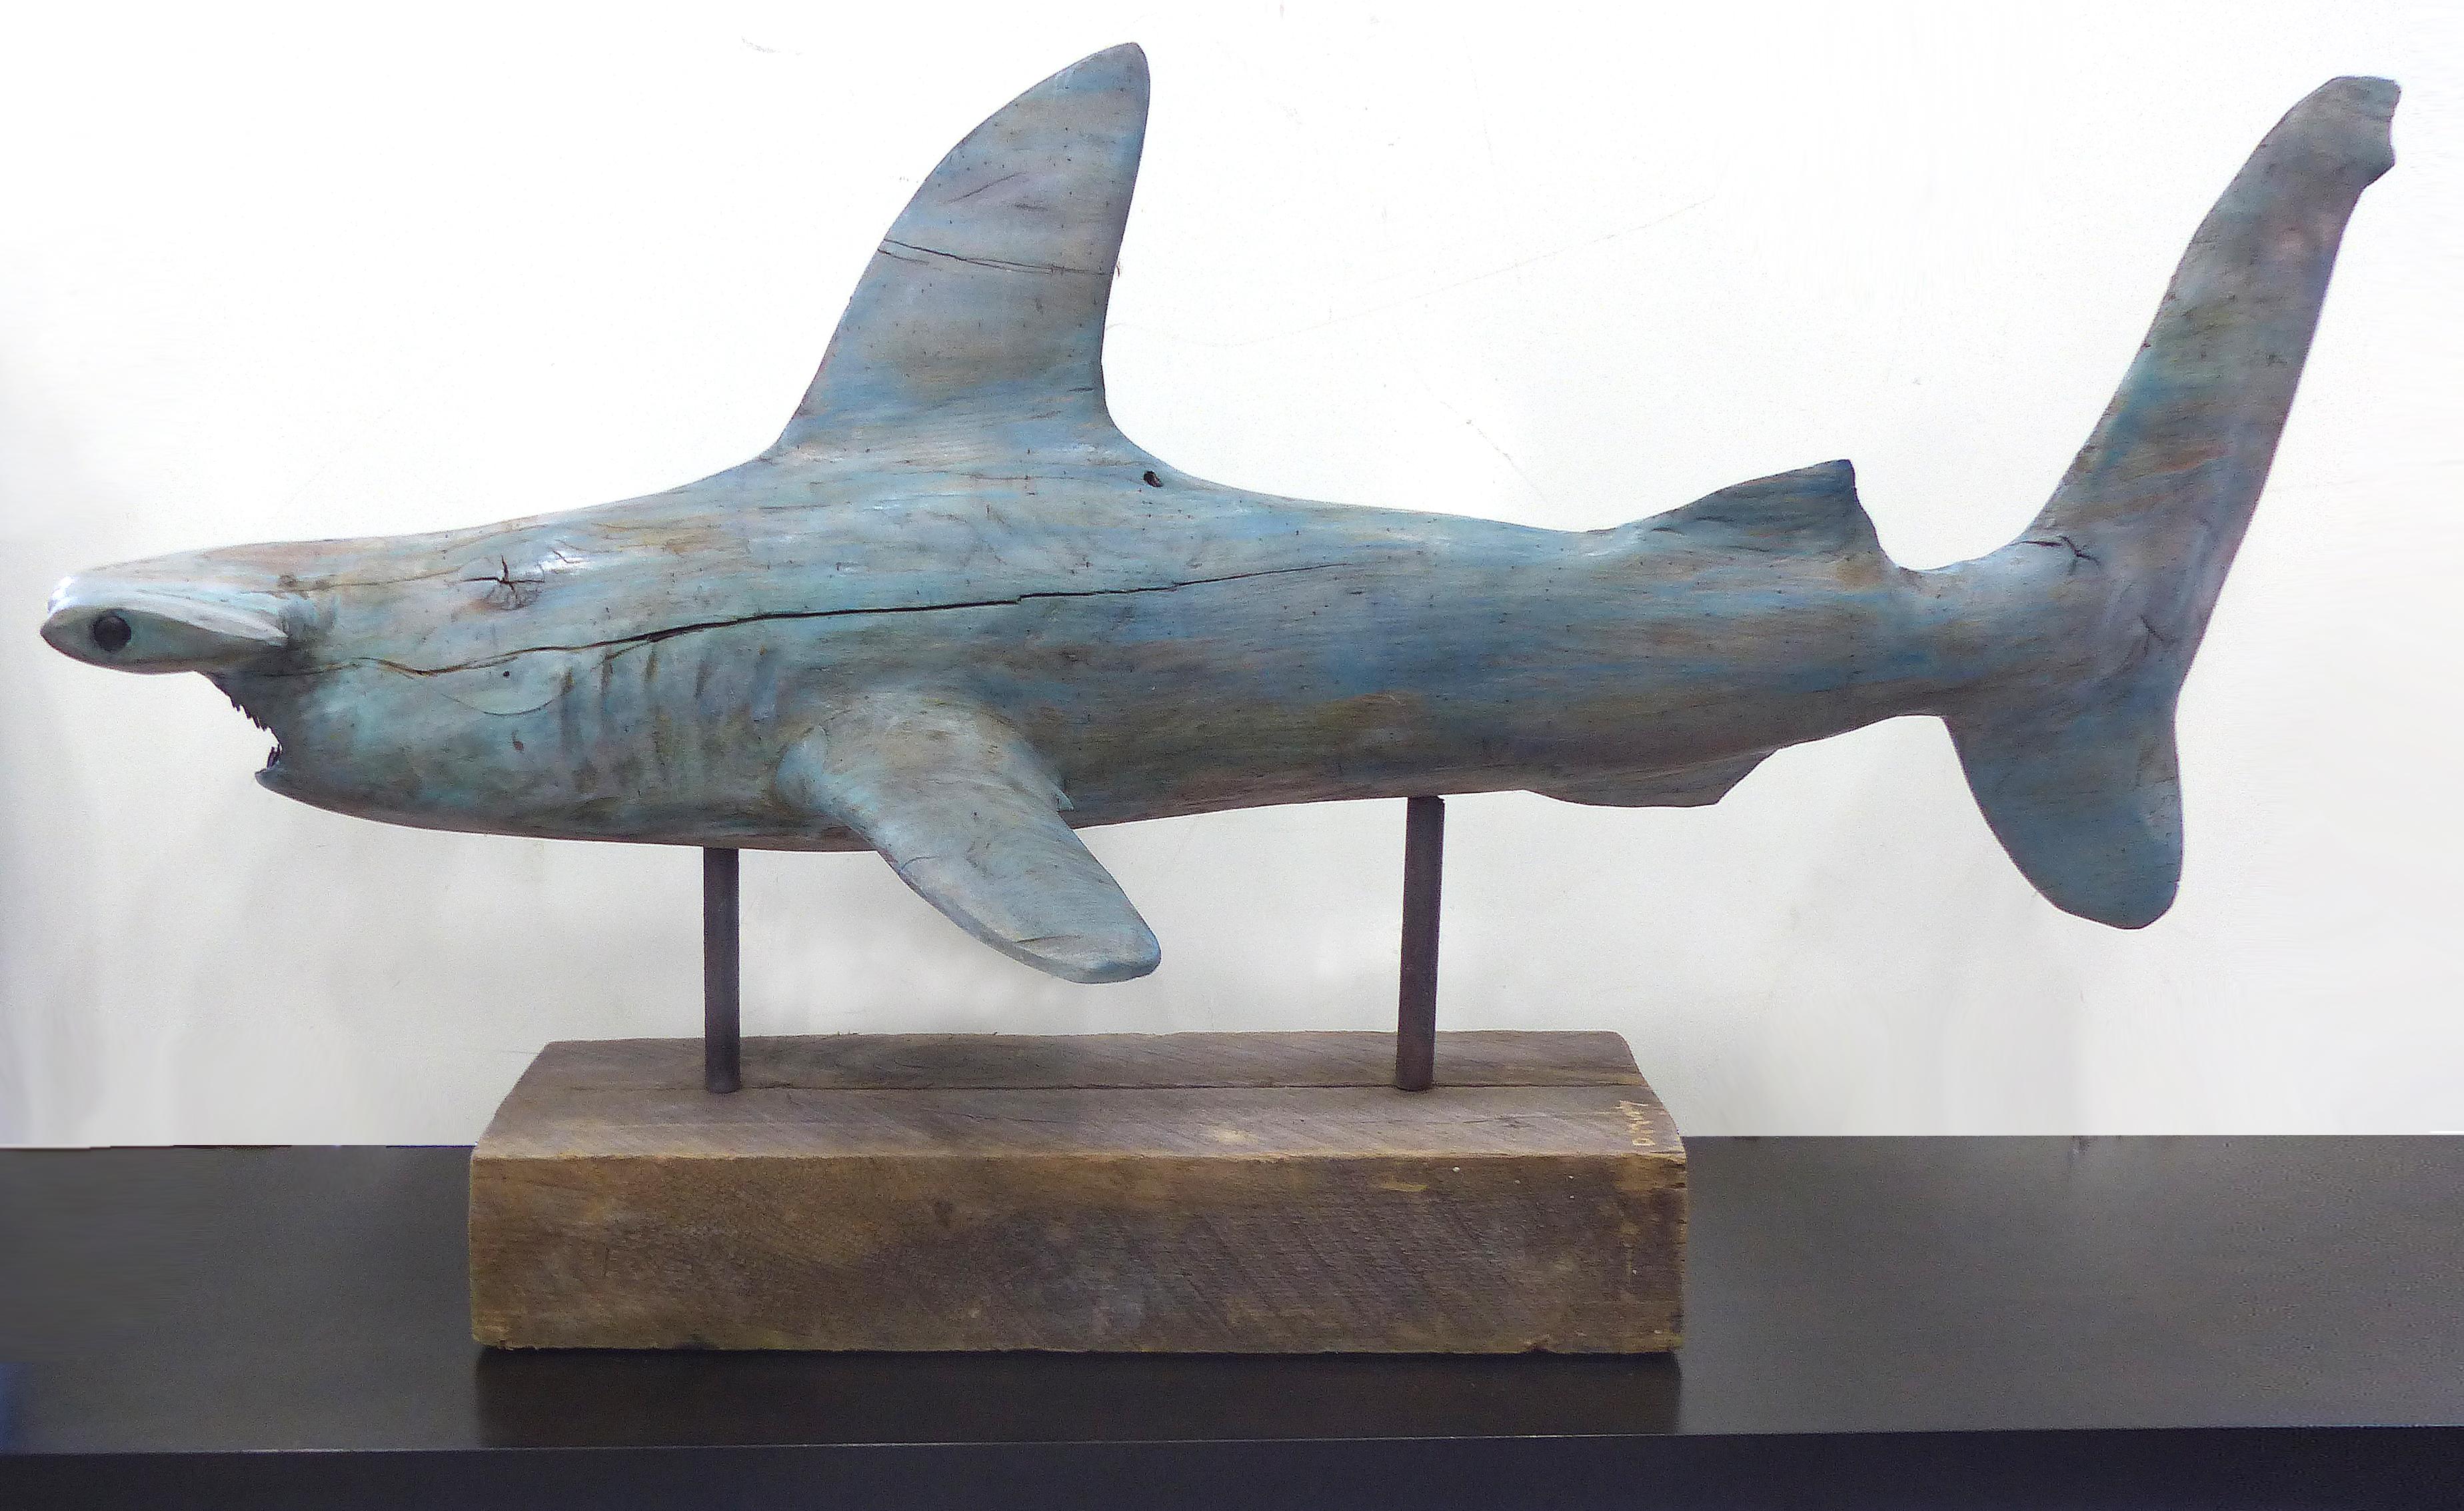 Davis Murphy hand carved sculpture of a Hammerhead Shark, 2018

Offered for sale is a life-size hand carved sculpture of a hammerhead shark by Florida born artist Davis Murphy. The sculpture is carved from Carolina red oak, has glass eyes and